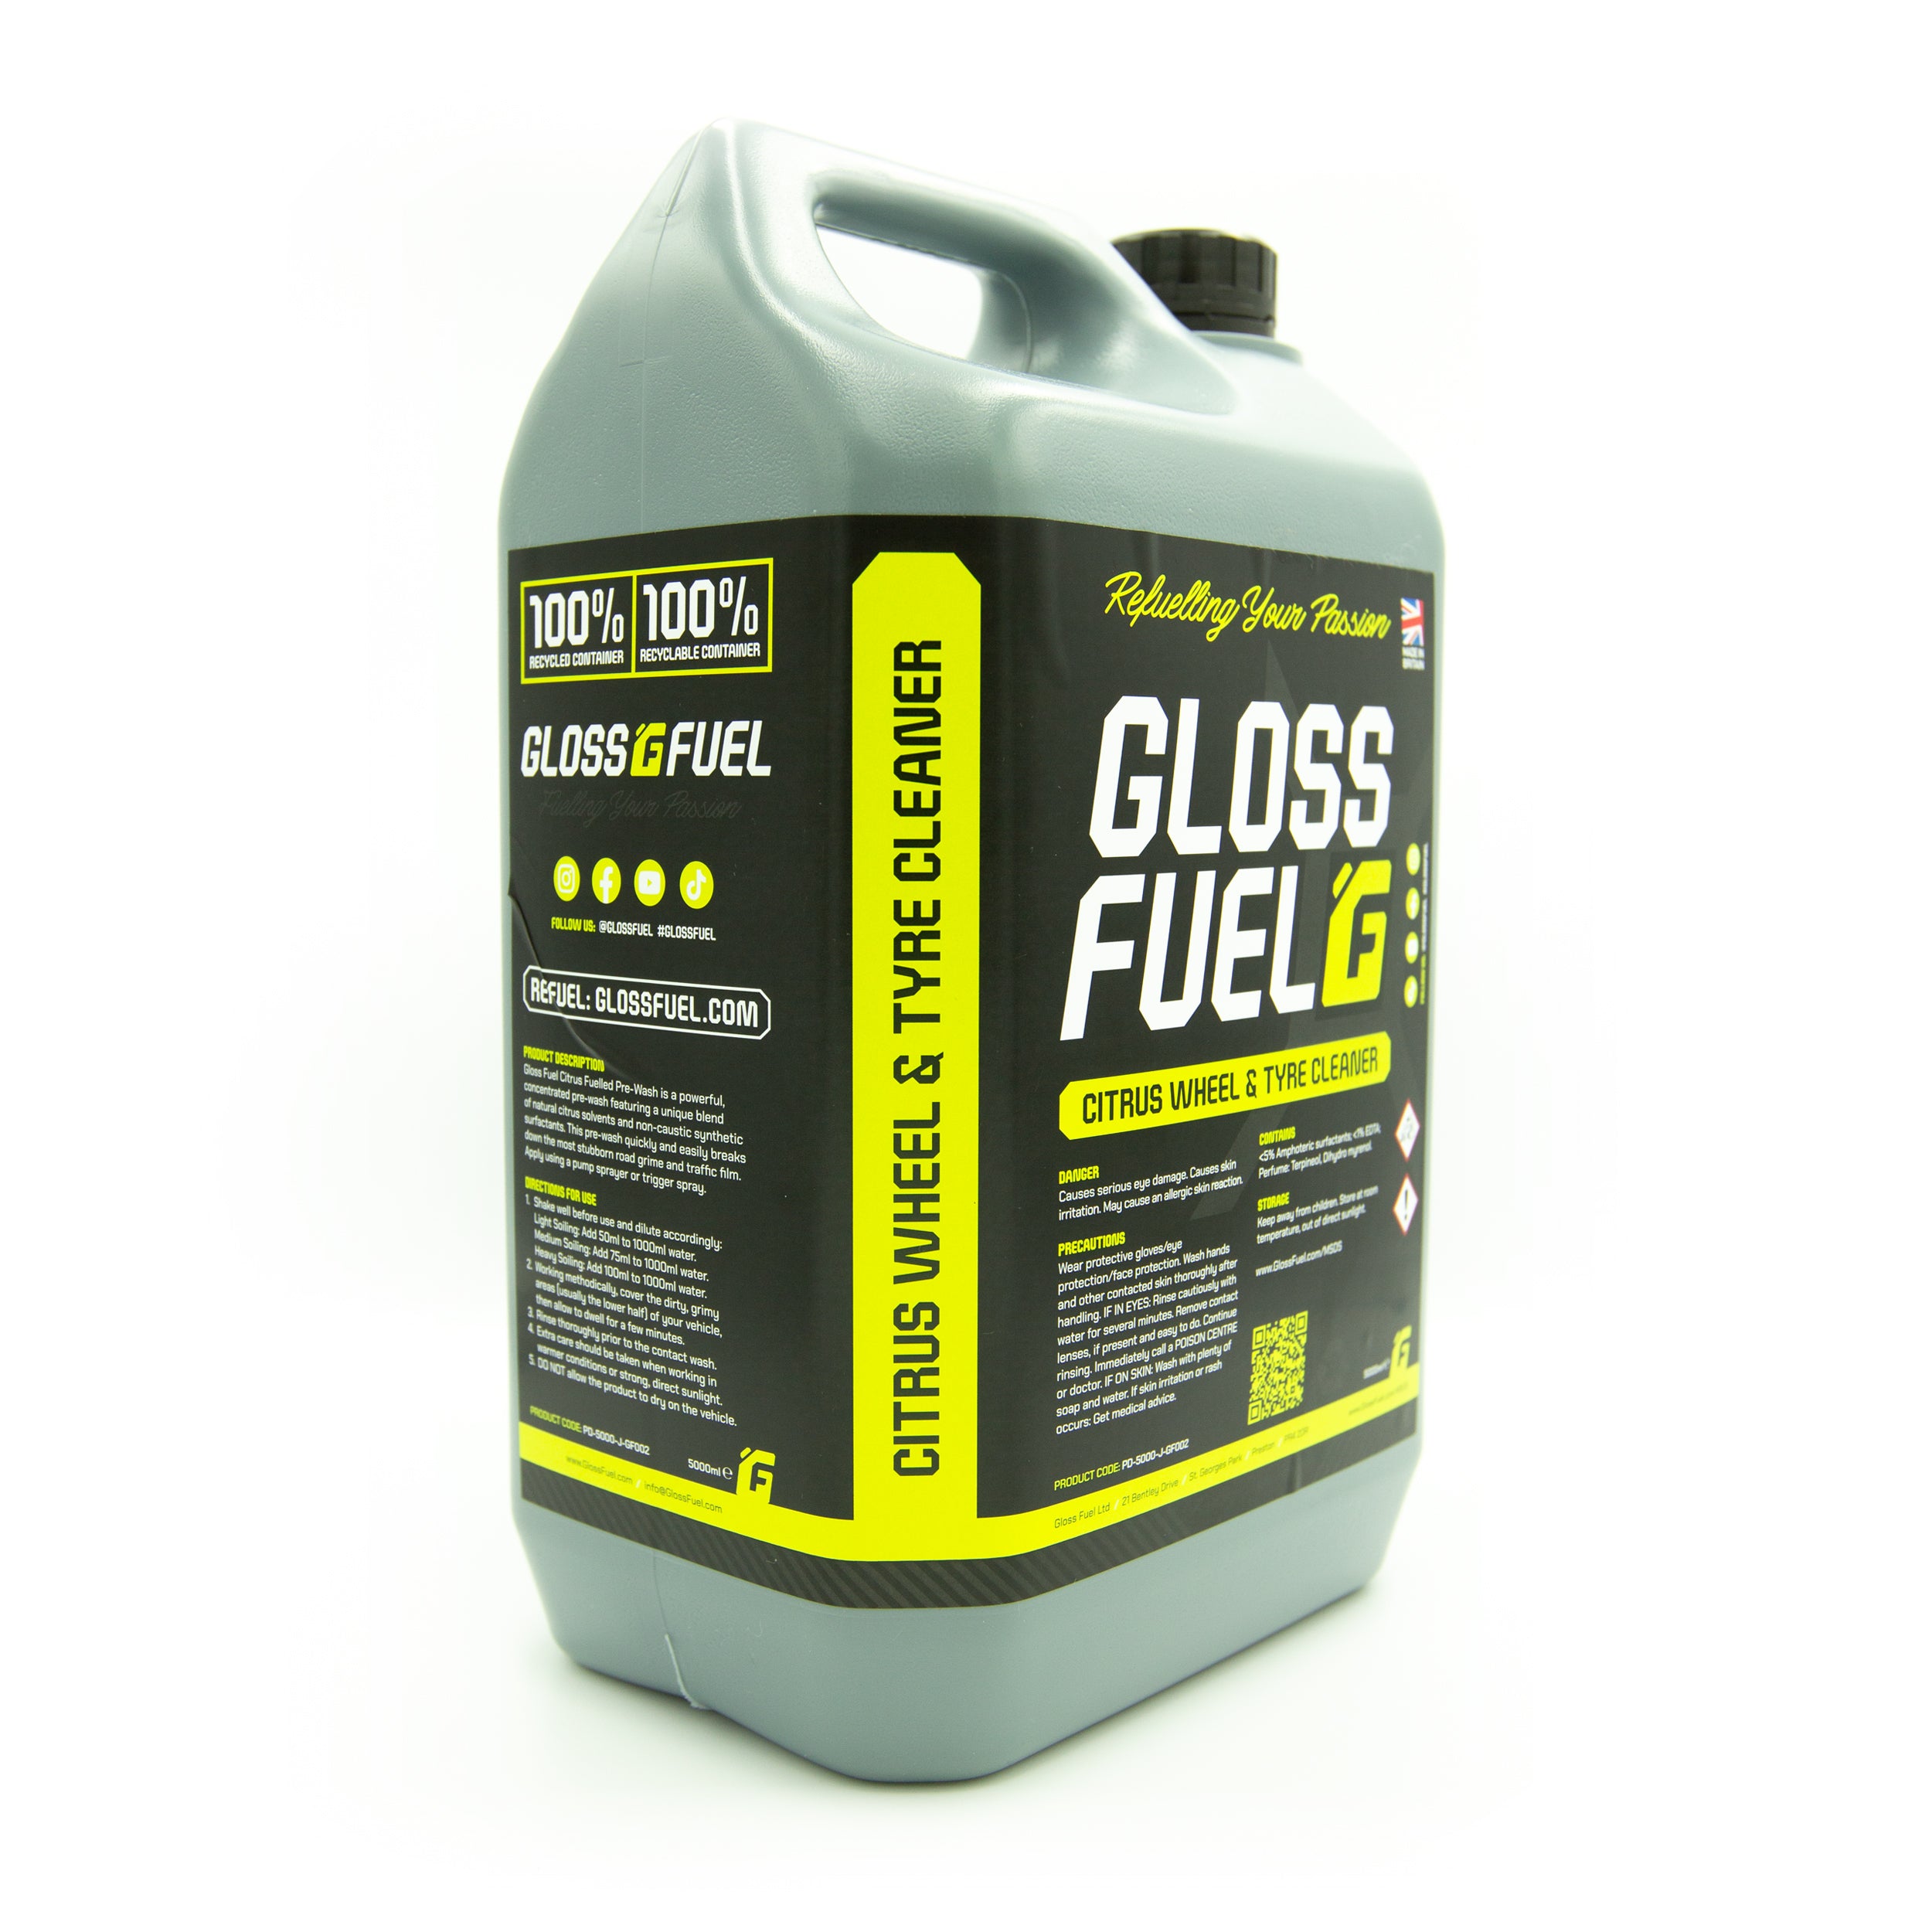 Citrus Wheel & Tyres Cleaner - 5L 100% PCR Jerry Can